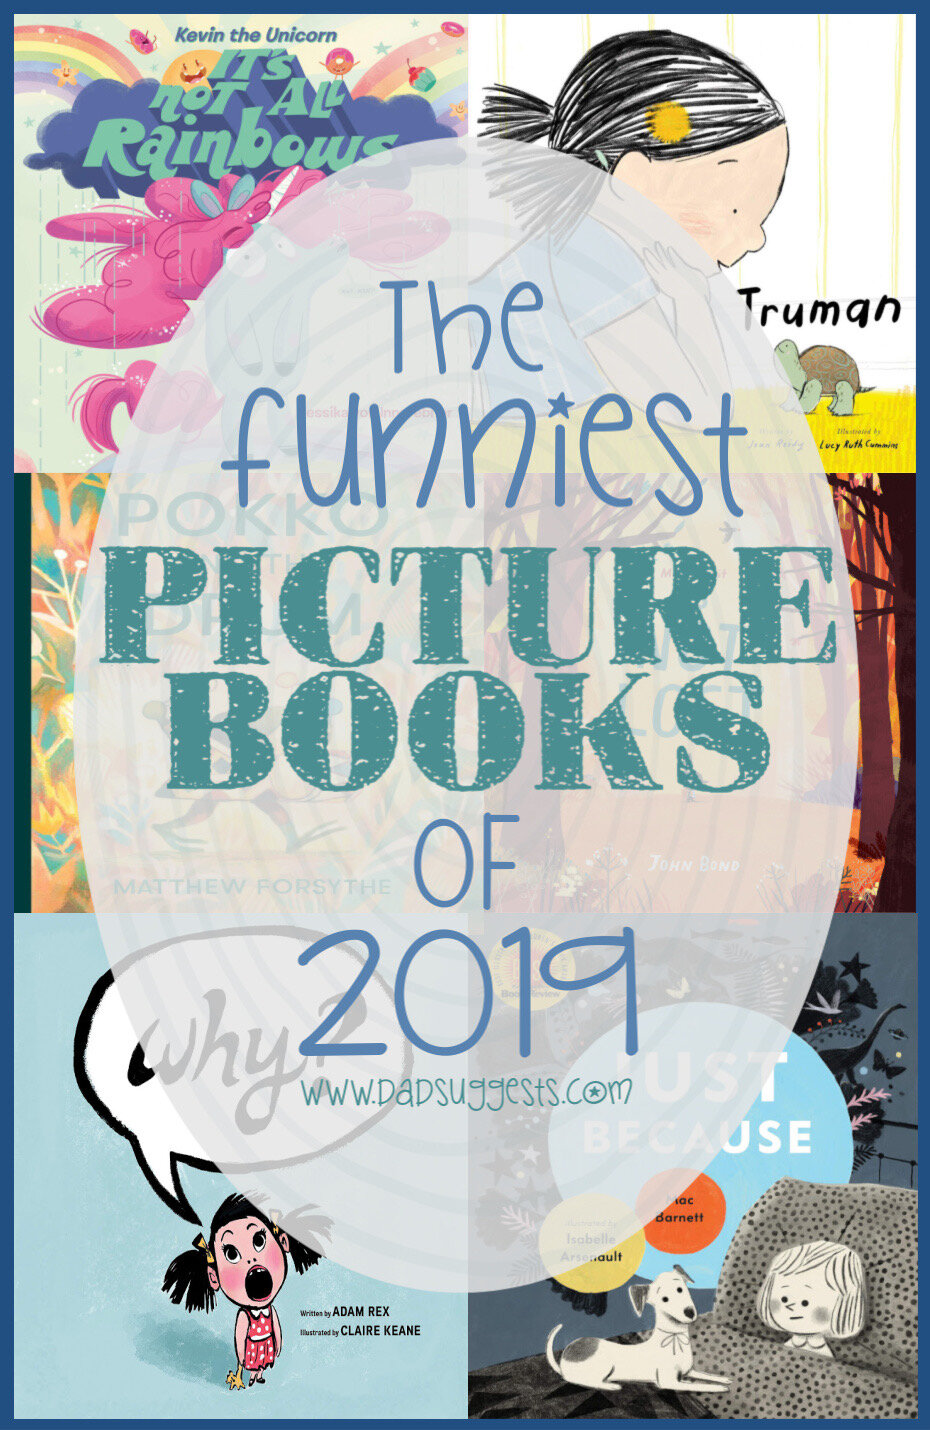 The 10 Funniest Picture Books of 2019 | Dad Suggests